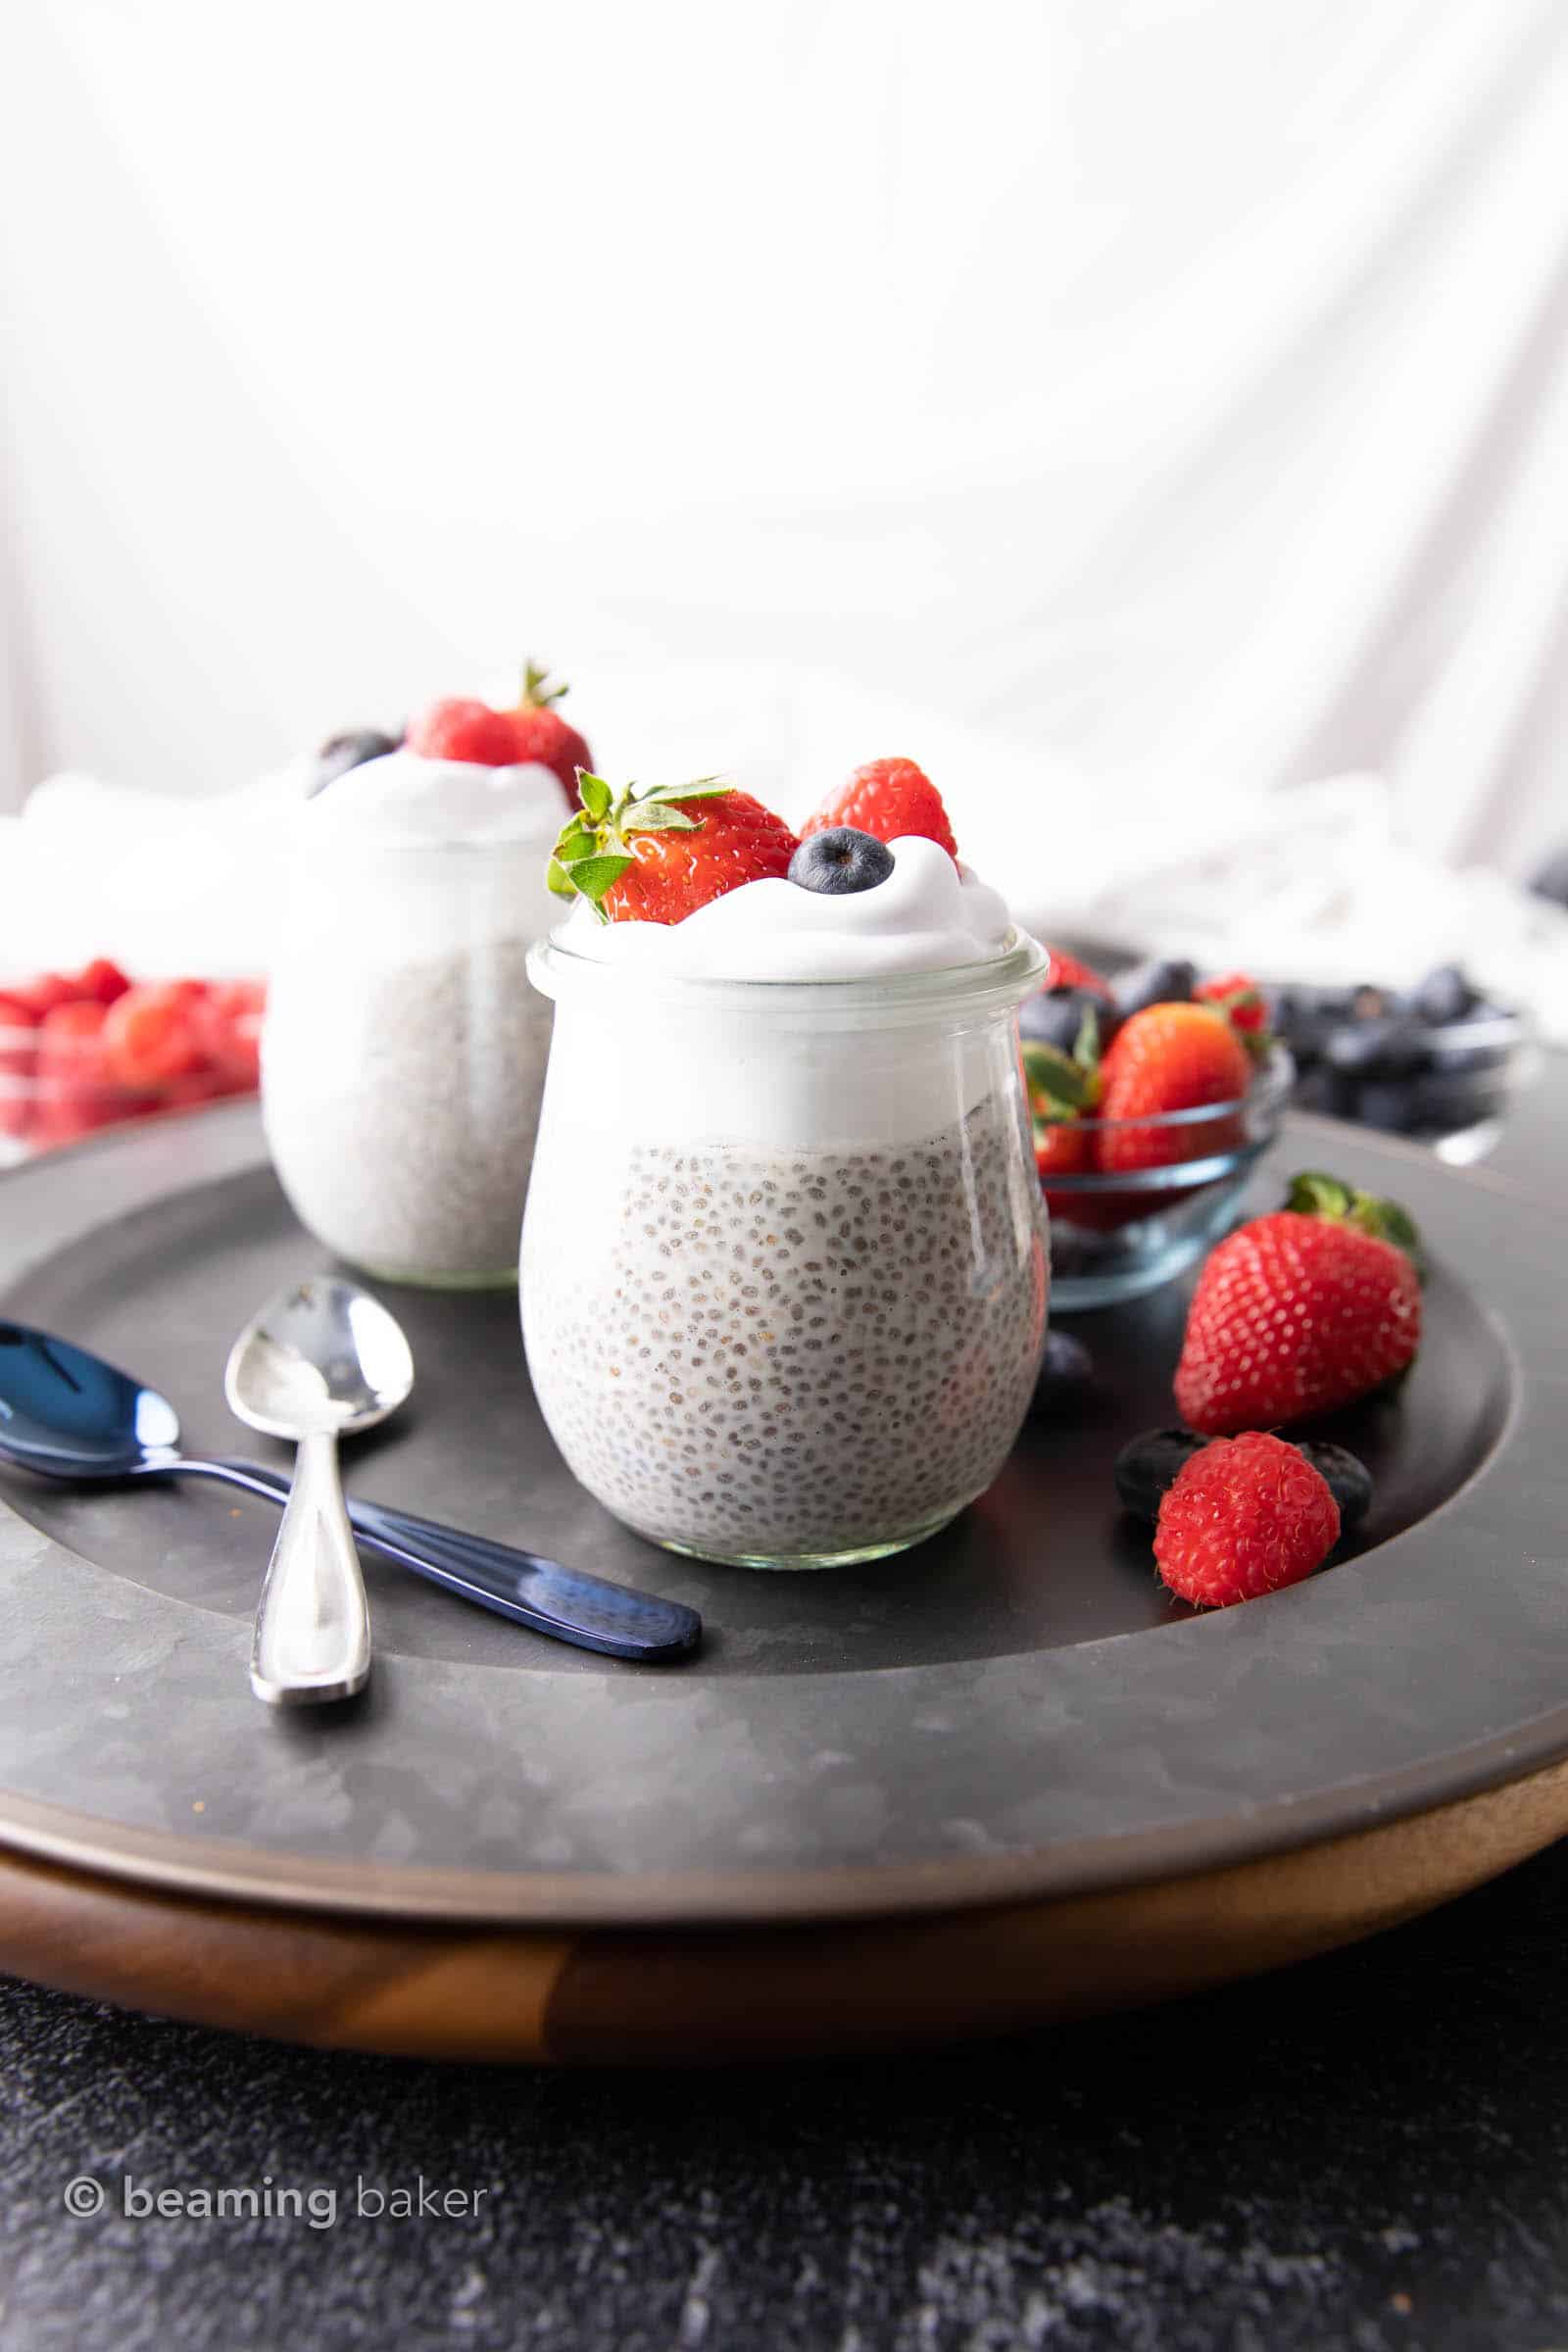 How to Make Chia Pudding: learn how to make chia pudding that’s rich and creamy. The best 3 ingredient chia pudding! #ChiaPudding #ChiaSeeds #ChiaRecipe | Recipe at BeamingBaker.com